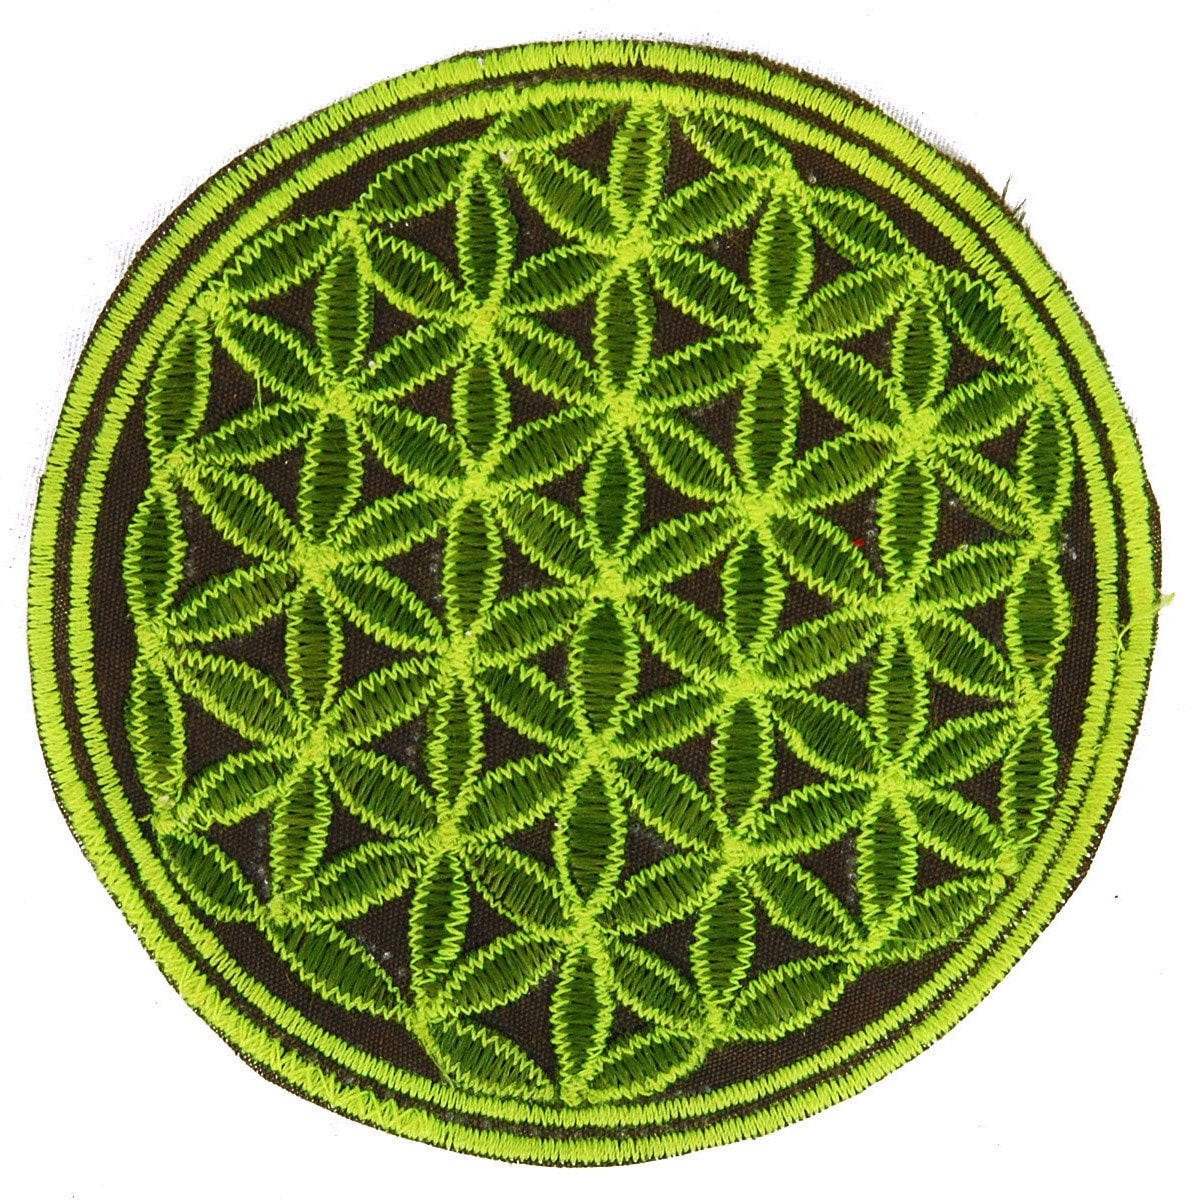 red flower of life patch small size embroidery application for sew on with blacklight glowing lines